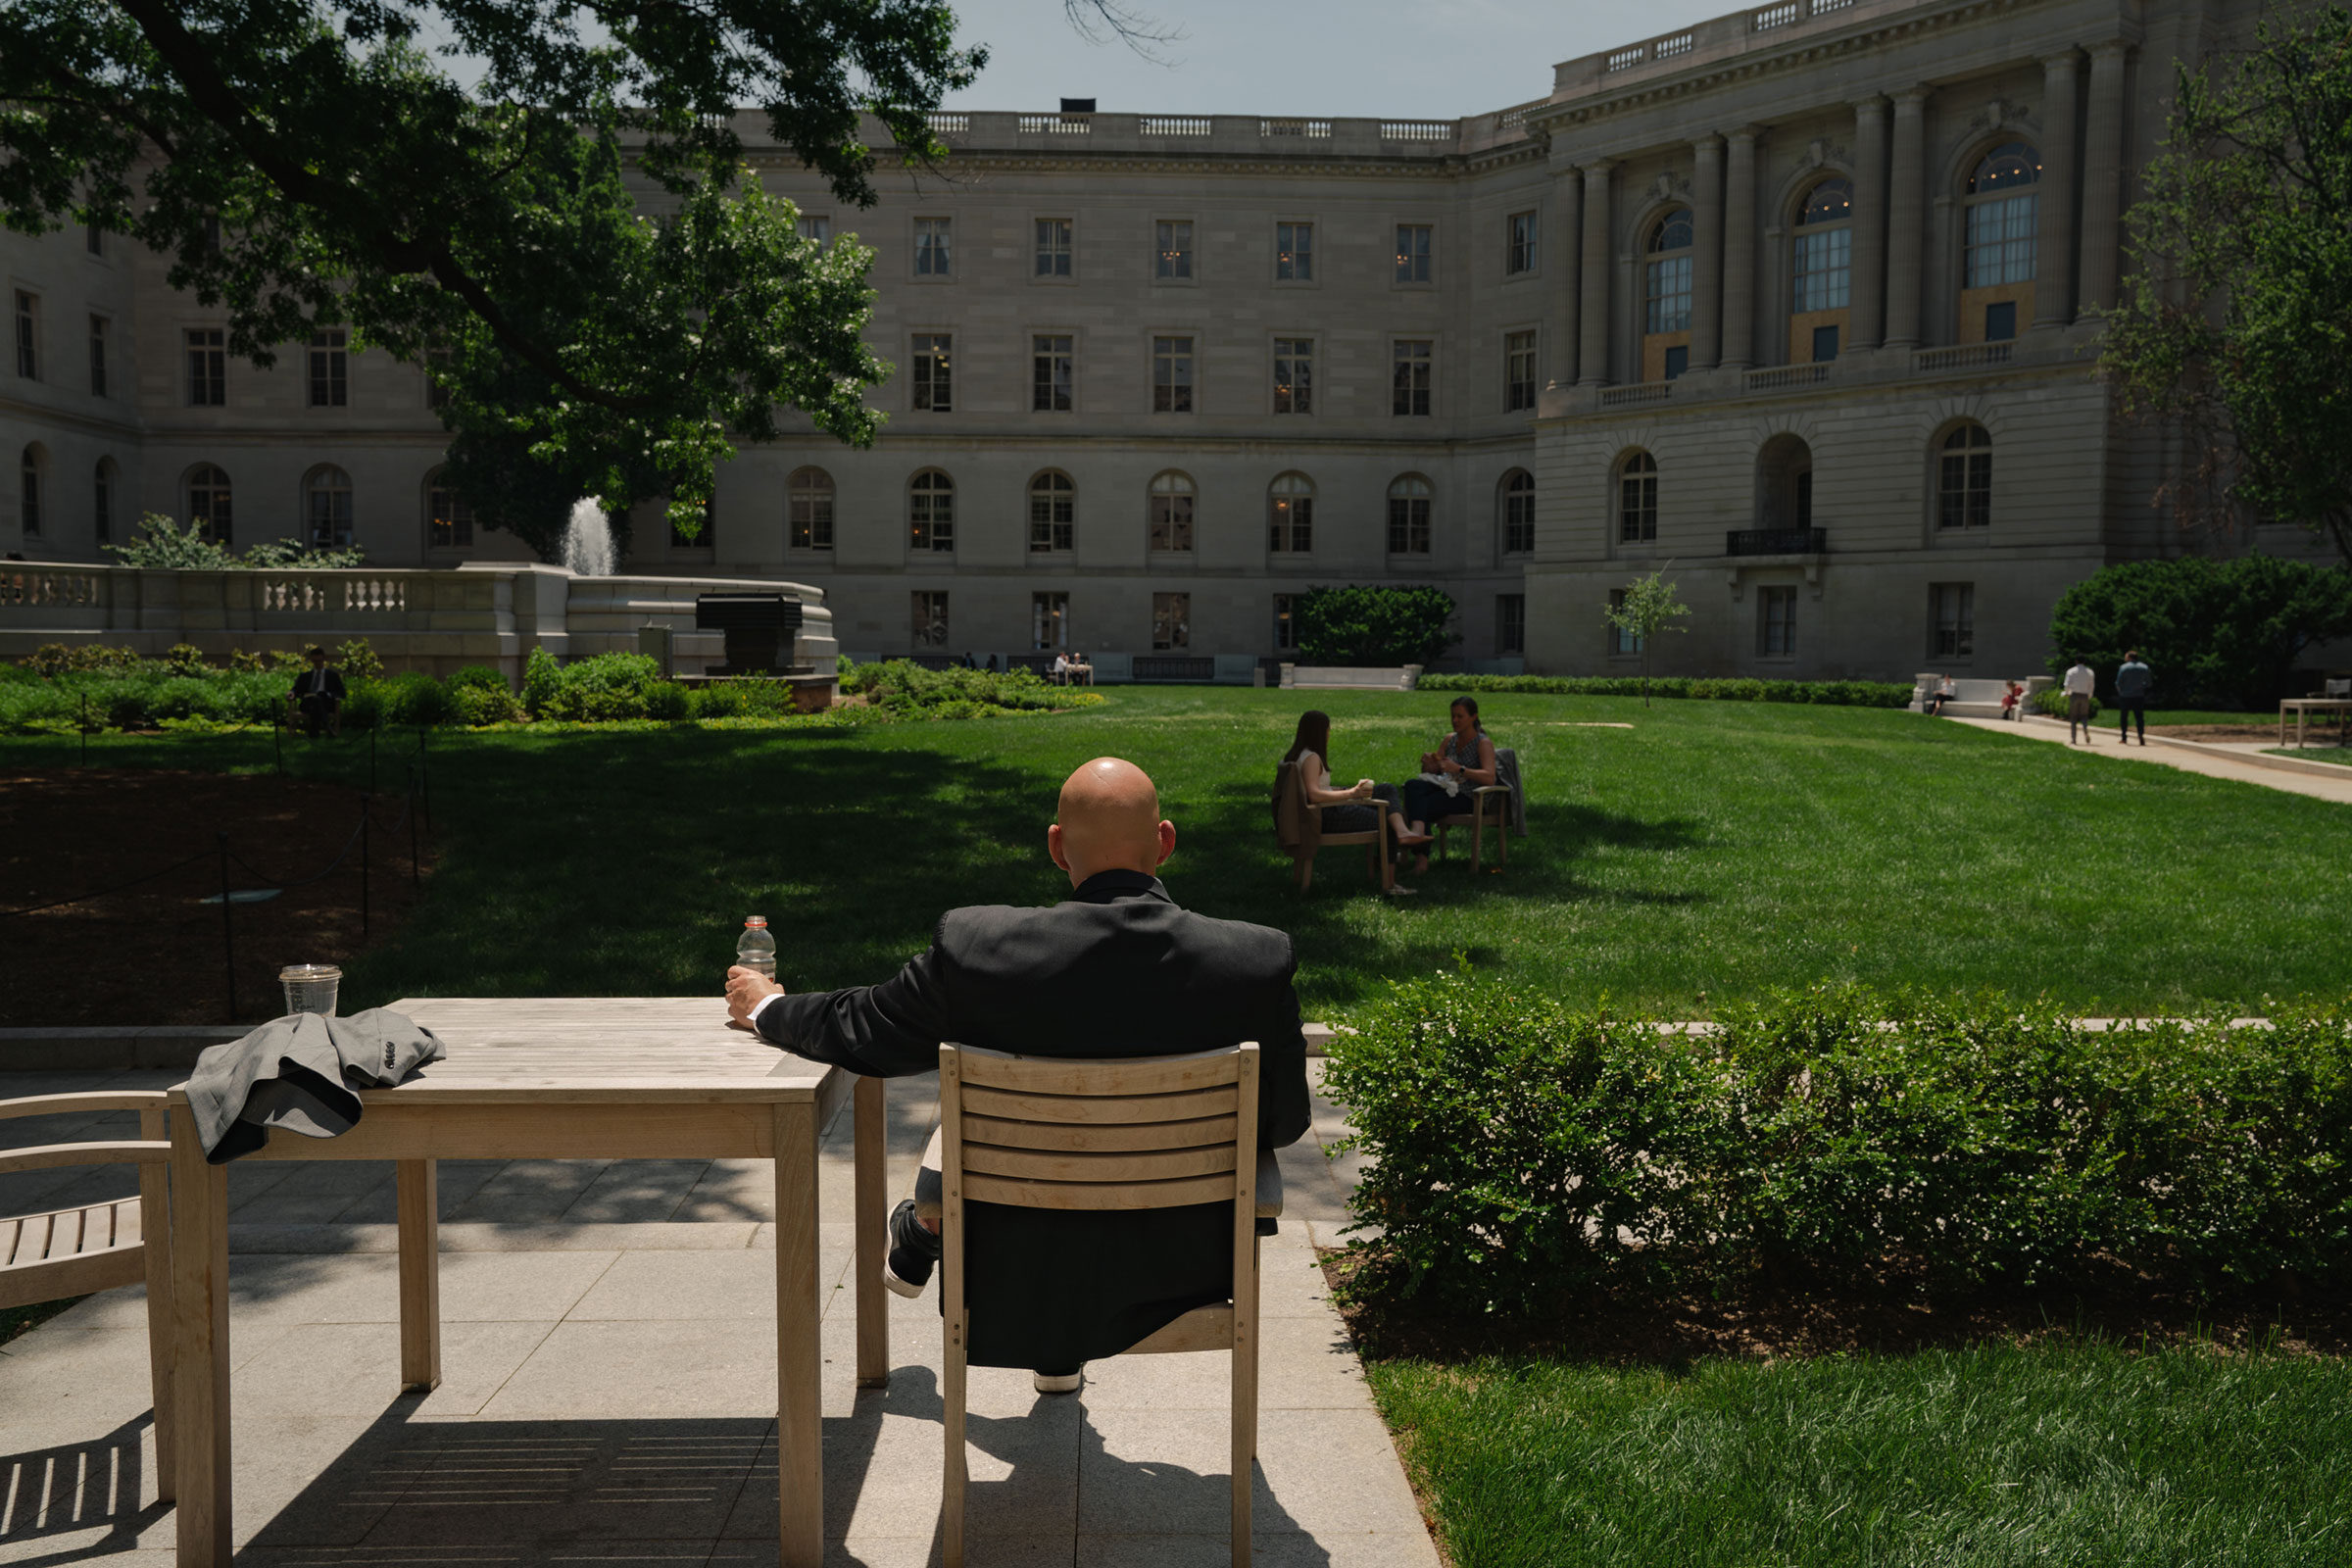 Fetterman takes a break outside during a busy work day (Shuran Huang for TIME)